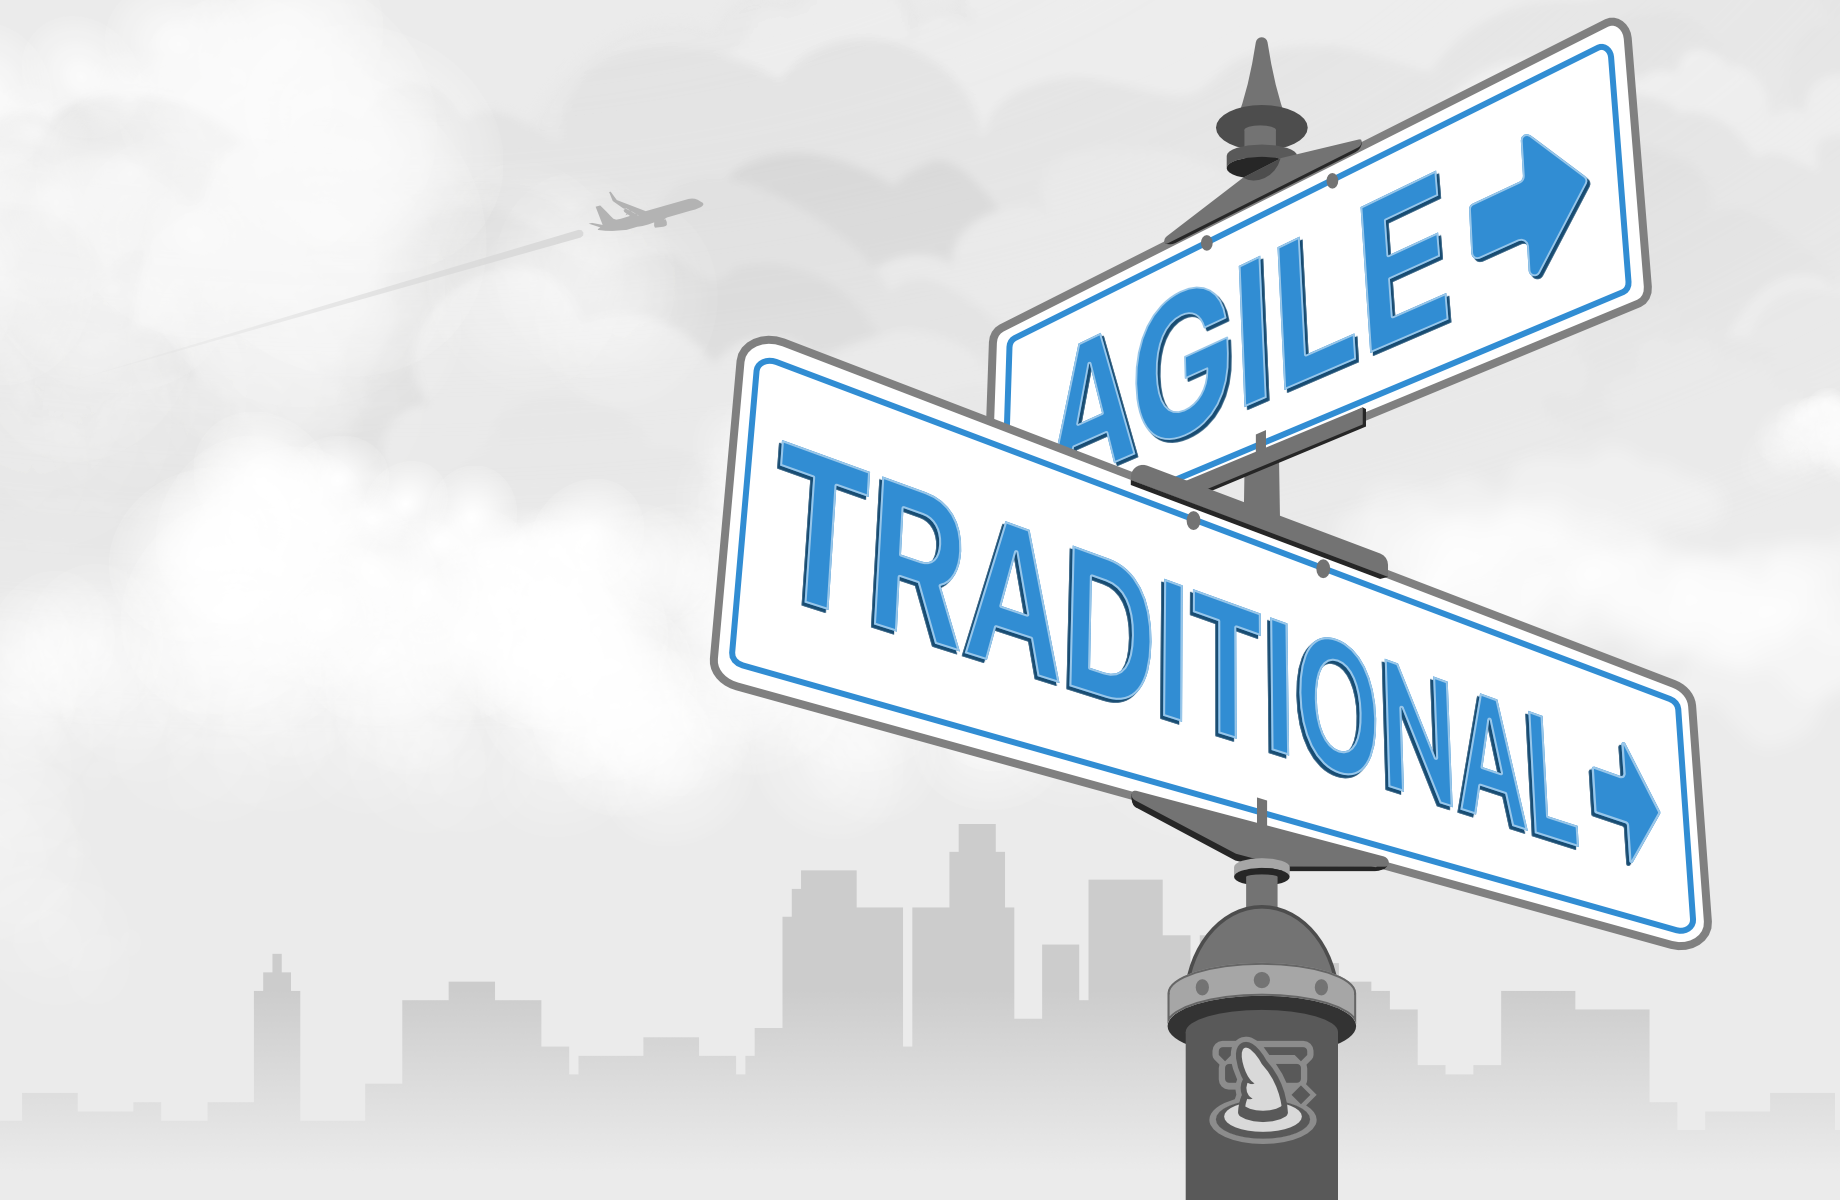 At the intersection of traditional and agile project management